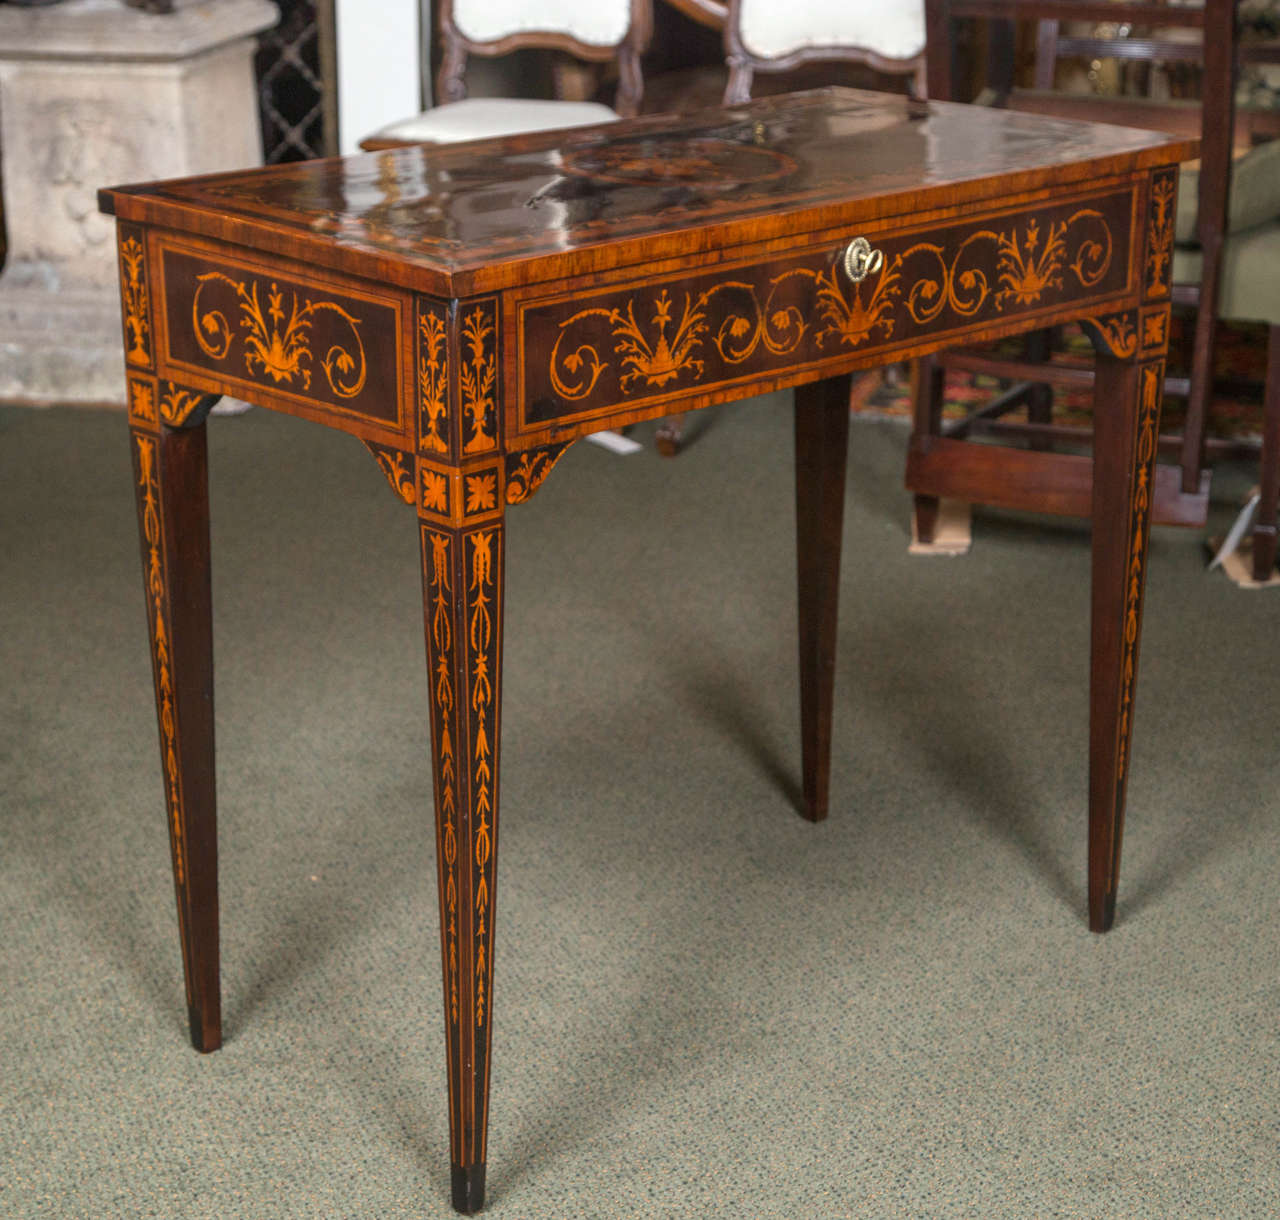 A wonderful inlaid and marquetry Italian work table. Very fine marquetry work. Provenance: Delmonico's Tucci estate.